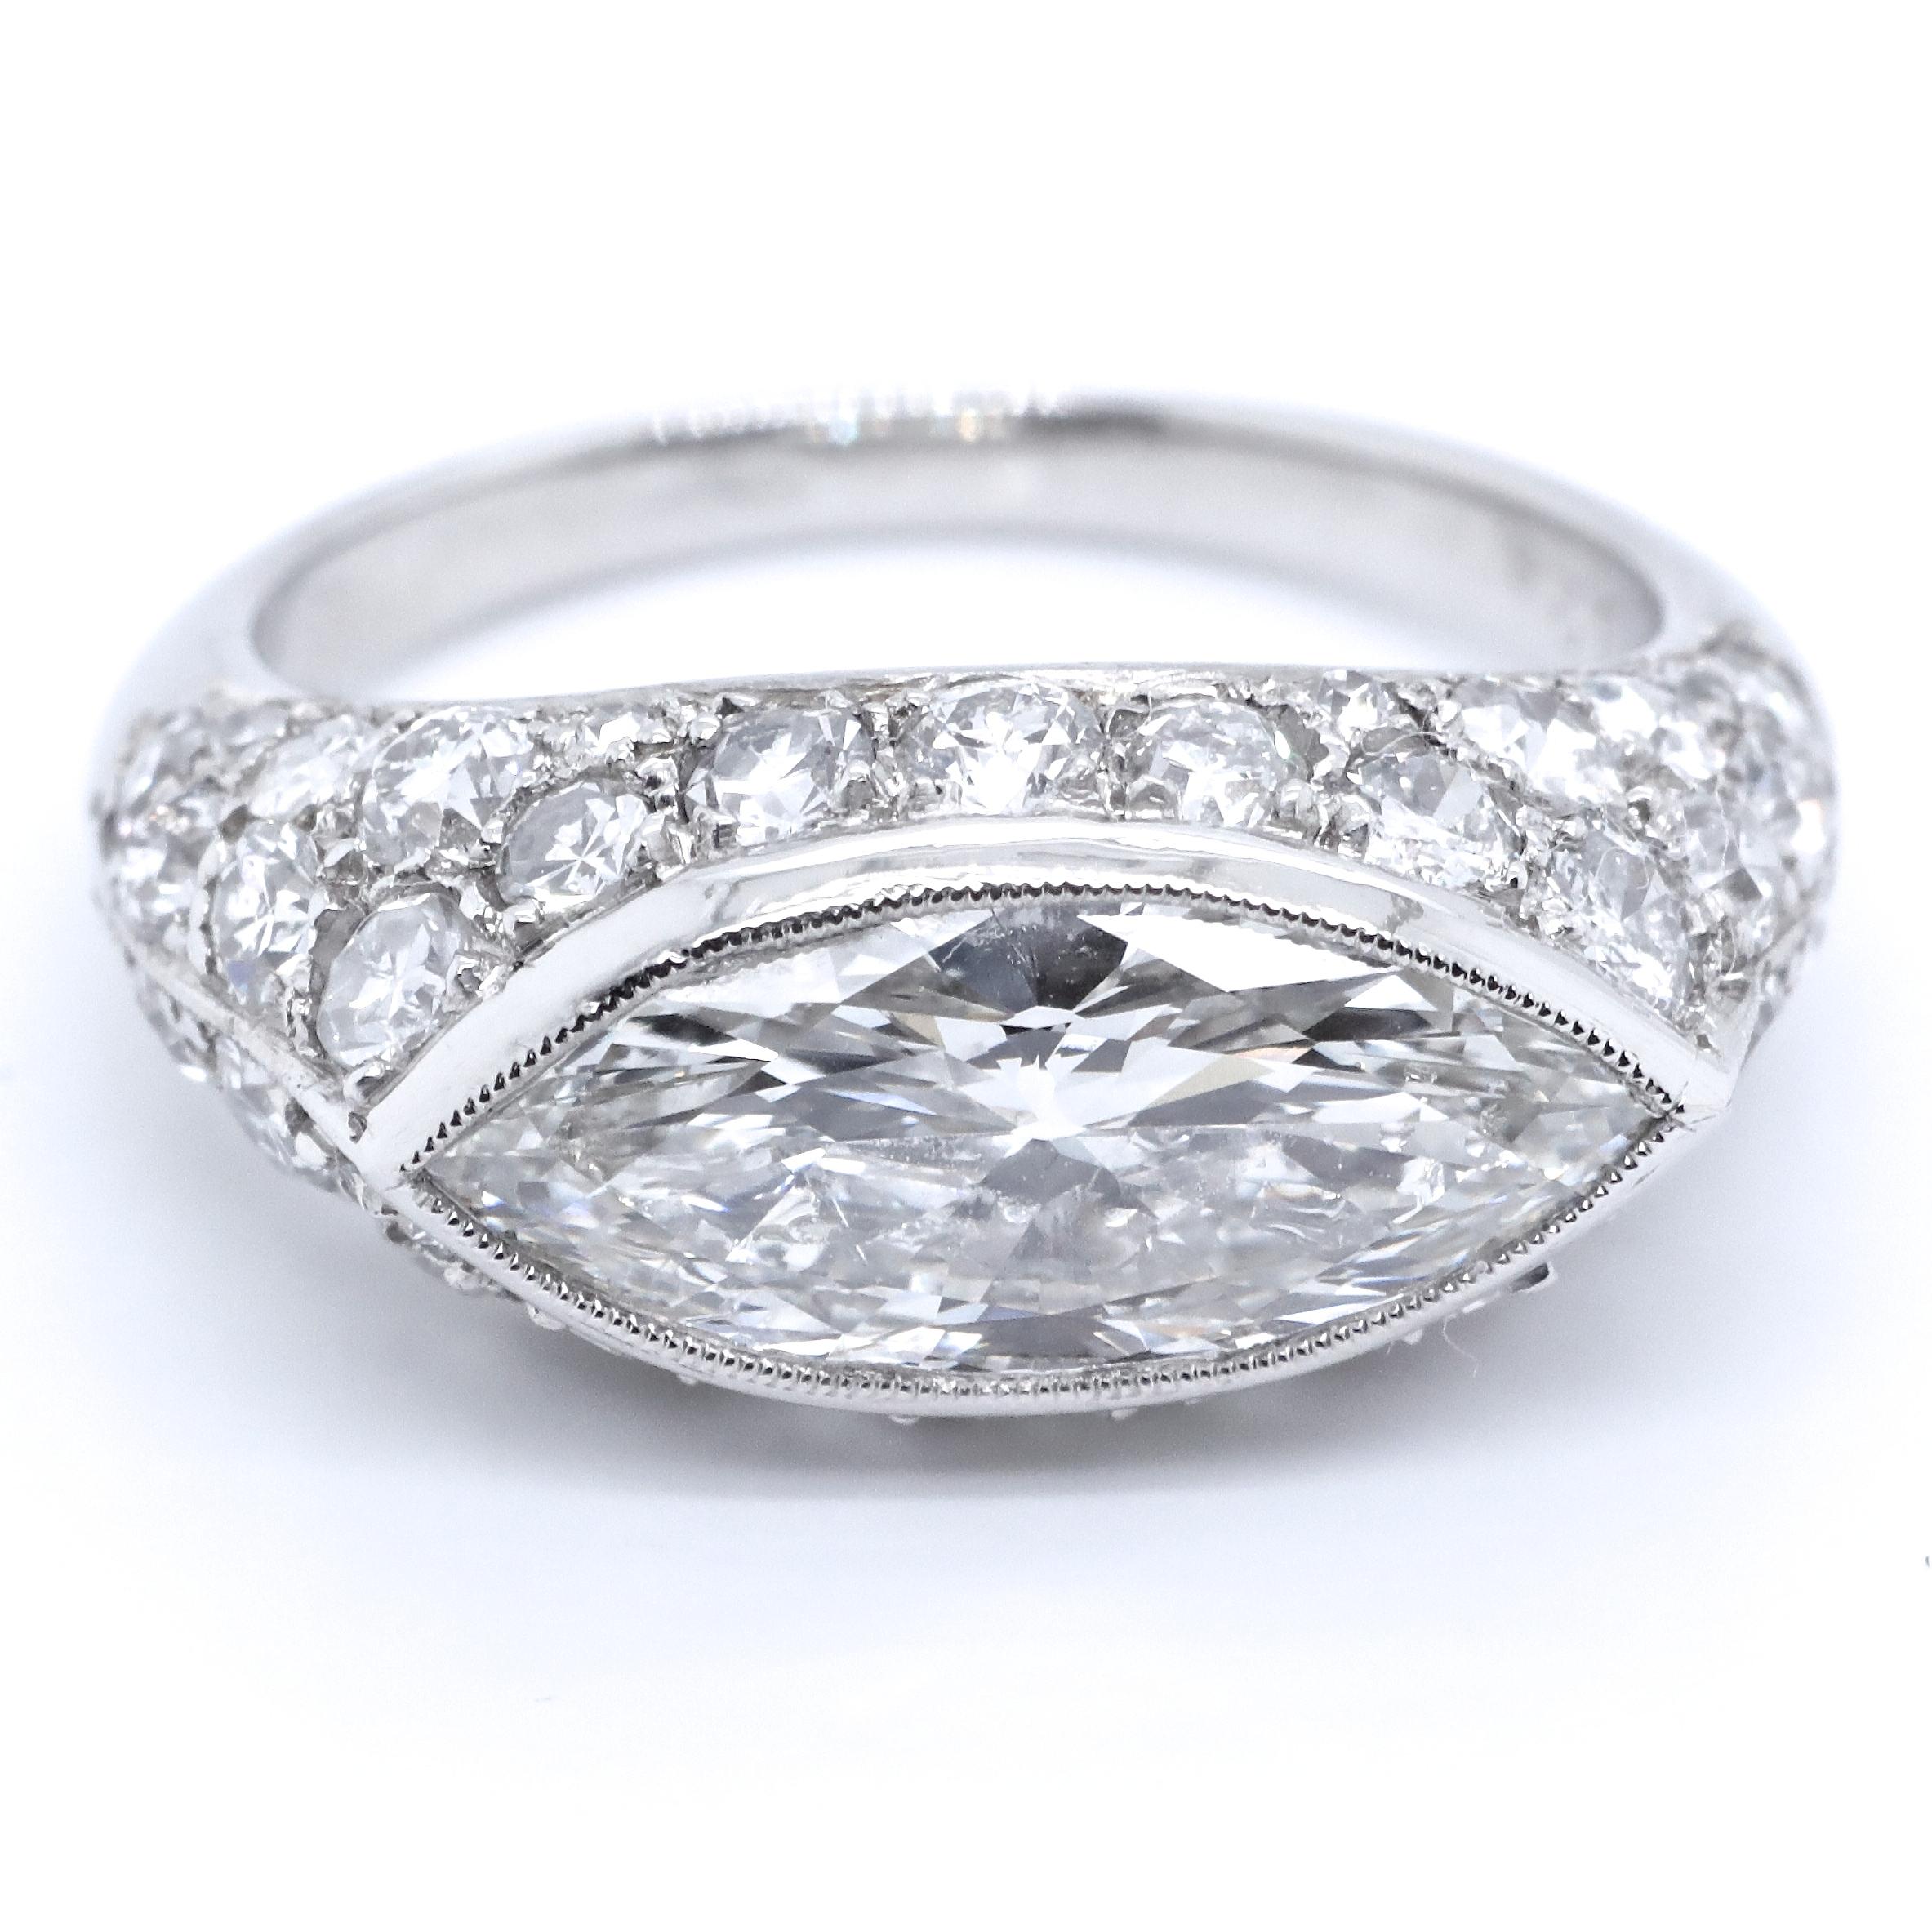 If you are looking for a one of a kind engagement ring, you just FOUND IT! Approximately 100 years old, with an east-west setting. There is no better combination for a unique antique engagement ring! Art Deco GIA Marquise Diamond Platinum Micro-Pave